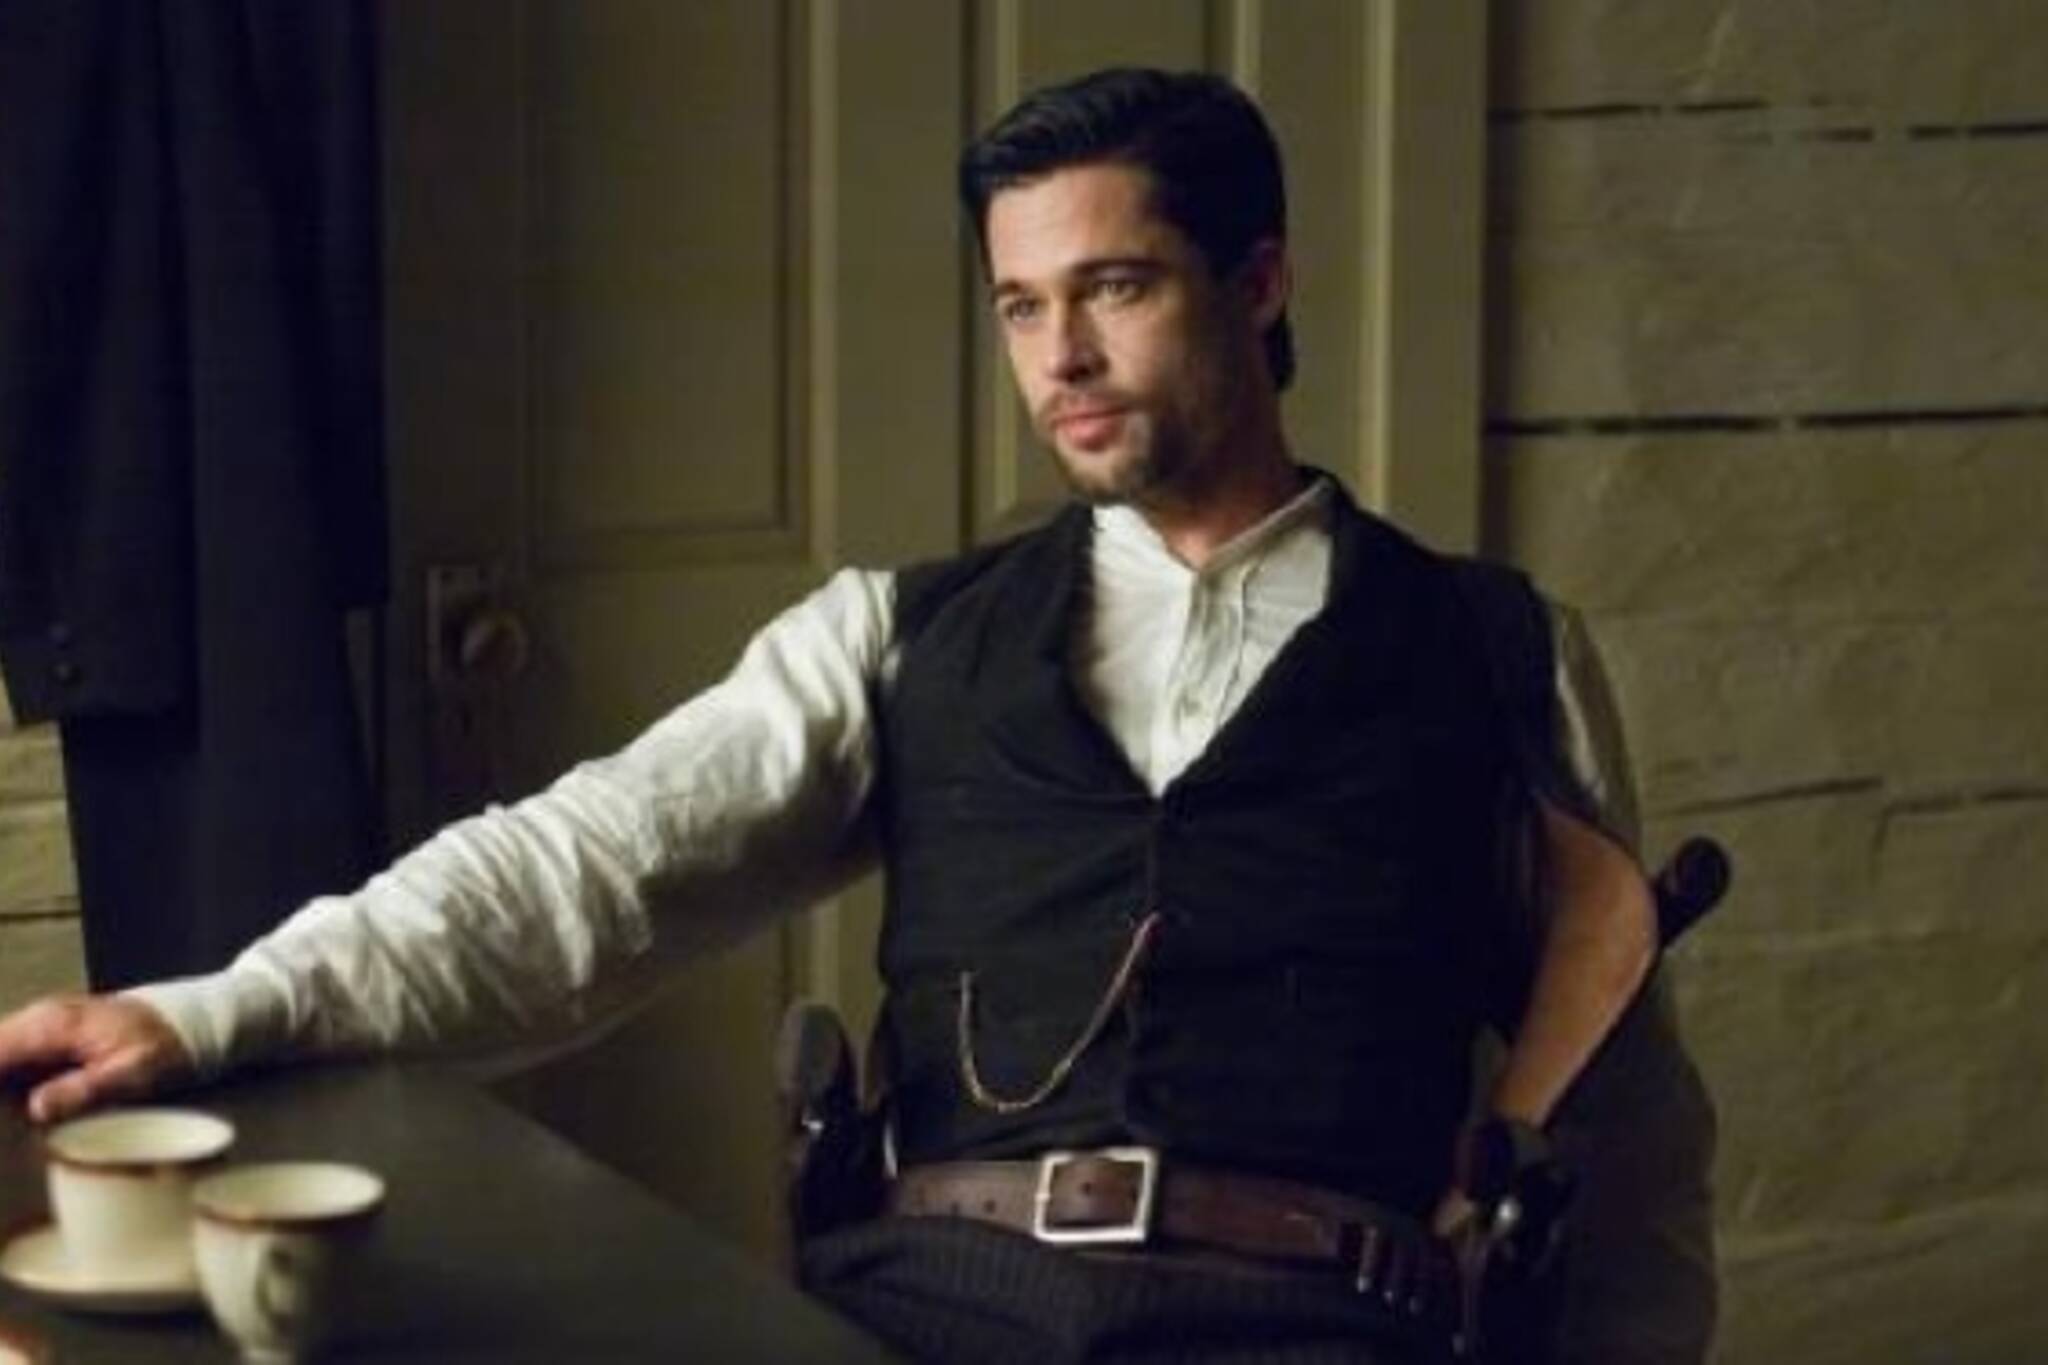 Brad Pitt in The Assassination of Jesse James by the Coward Robert Ford.